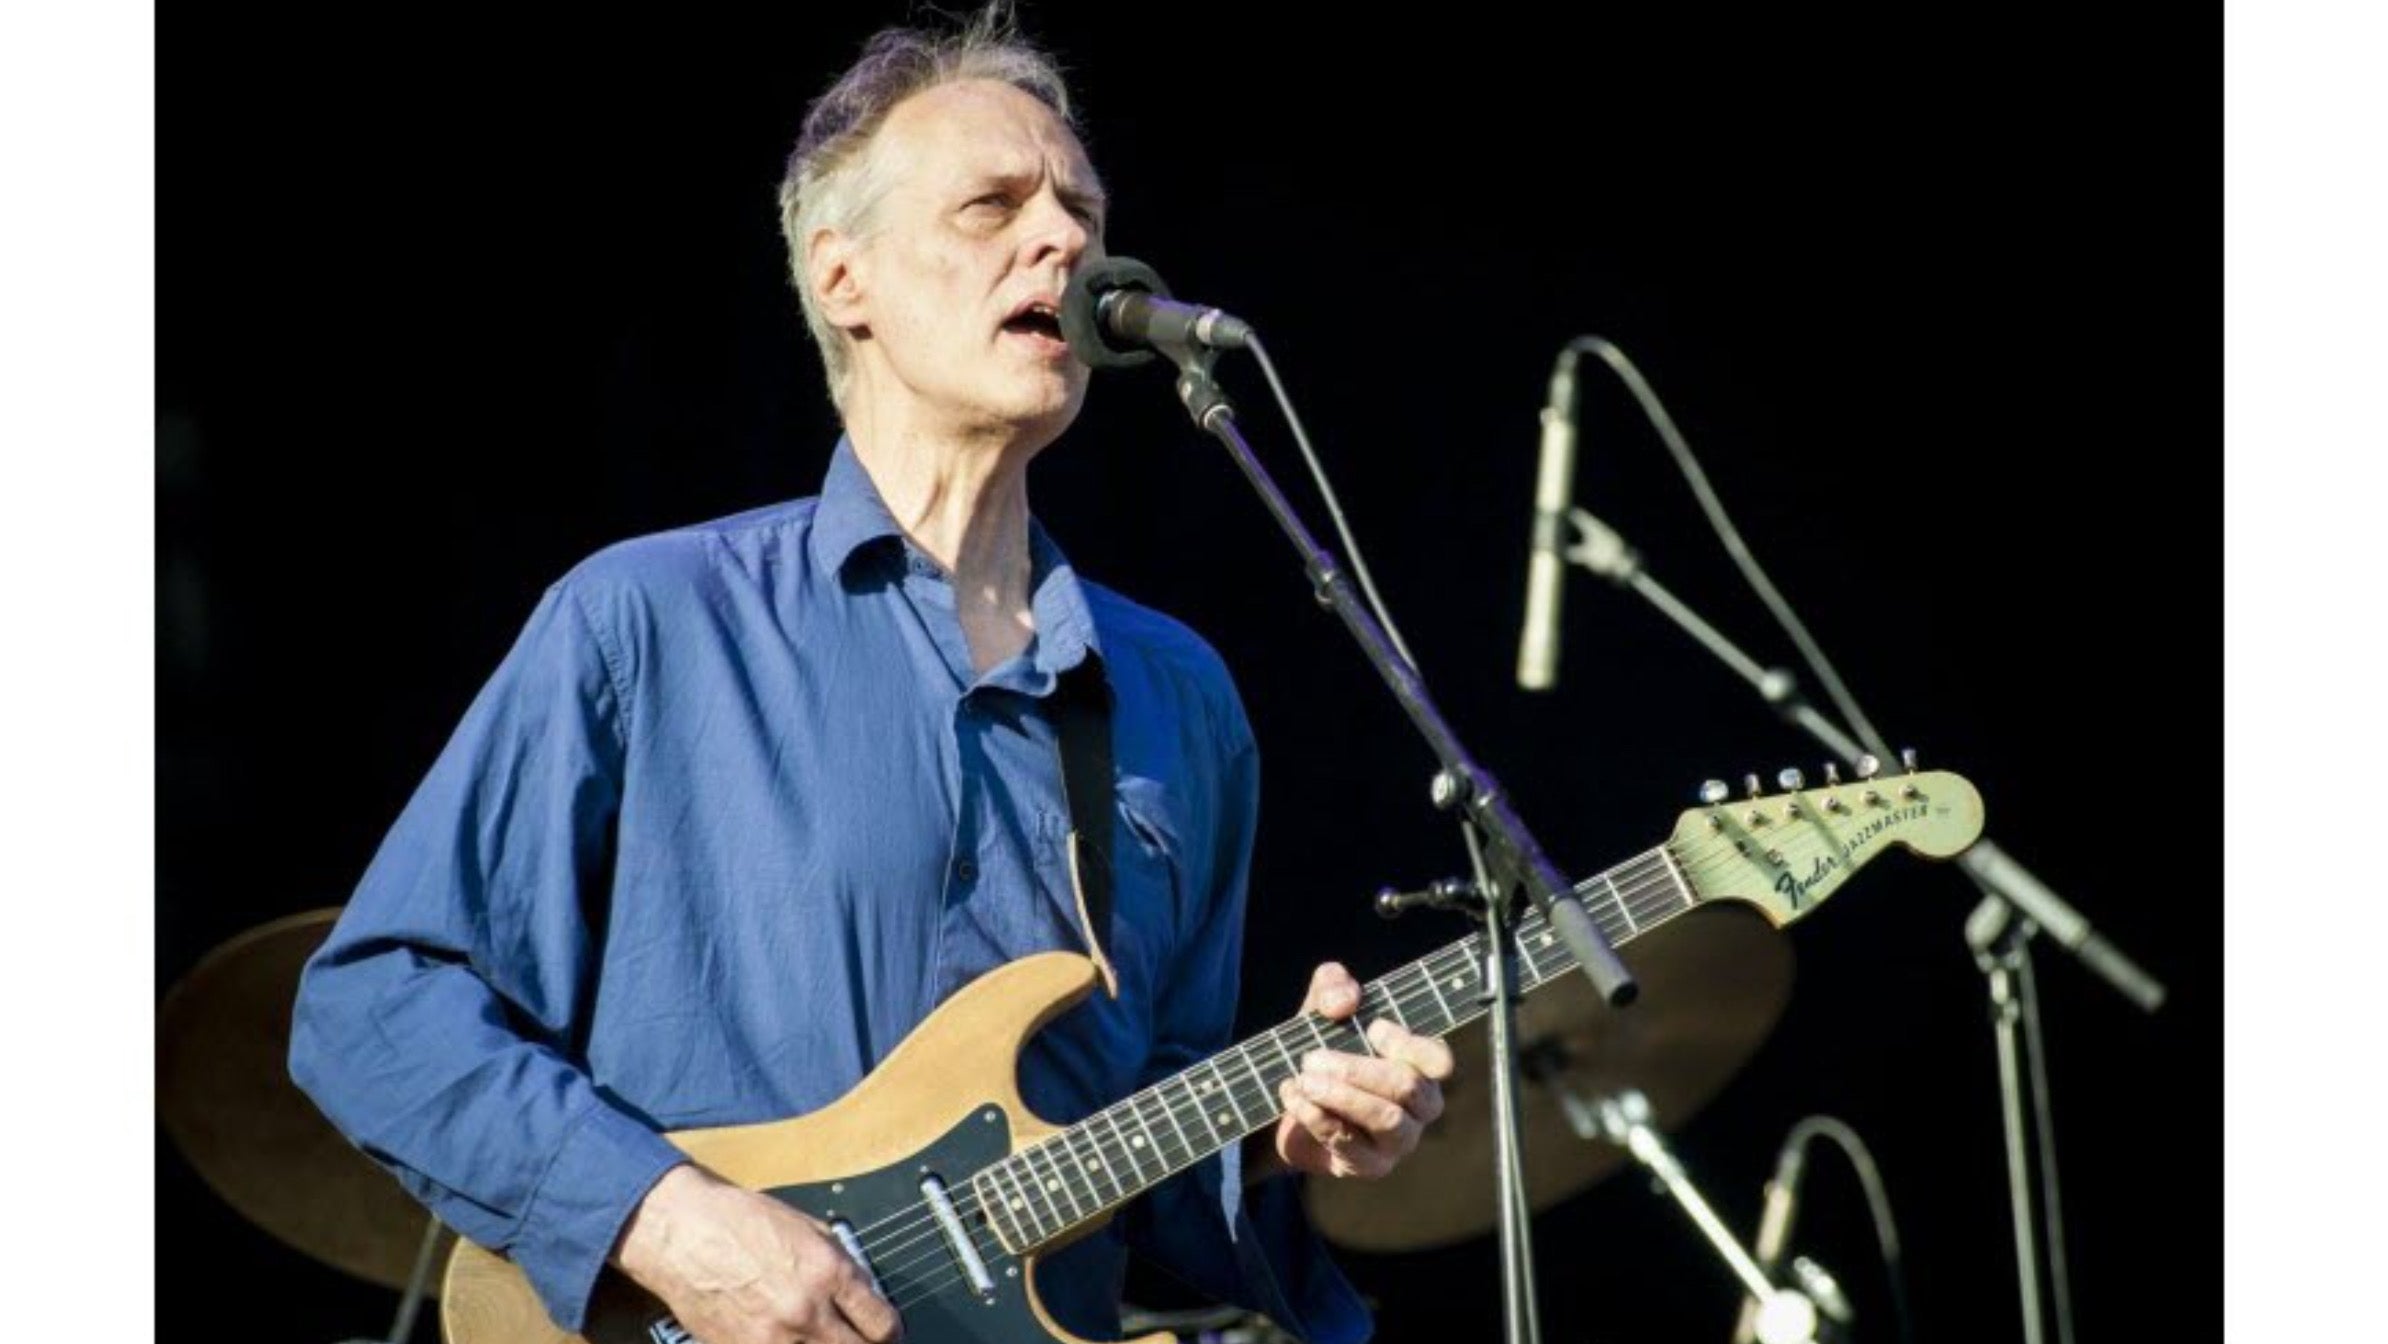 Tom Verlaine, ex-leader of the band Television and figure of the punk-rock scene, died at 73, Magnate Daily